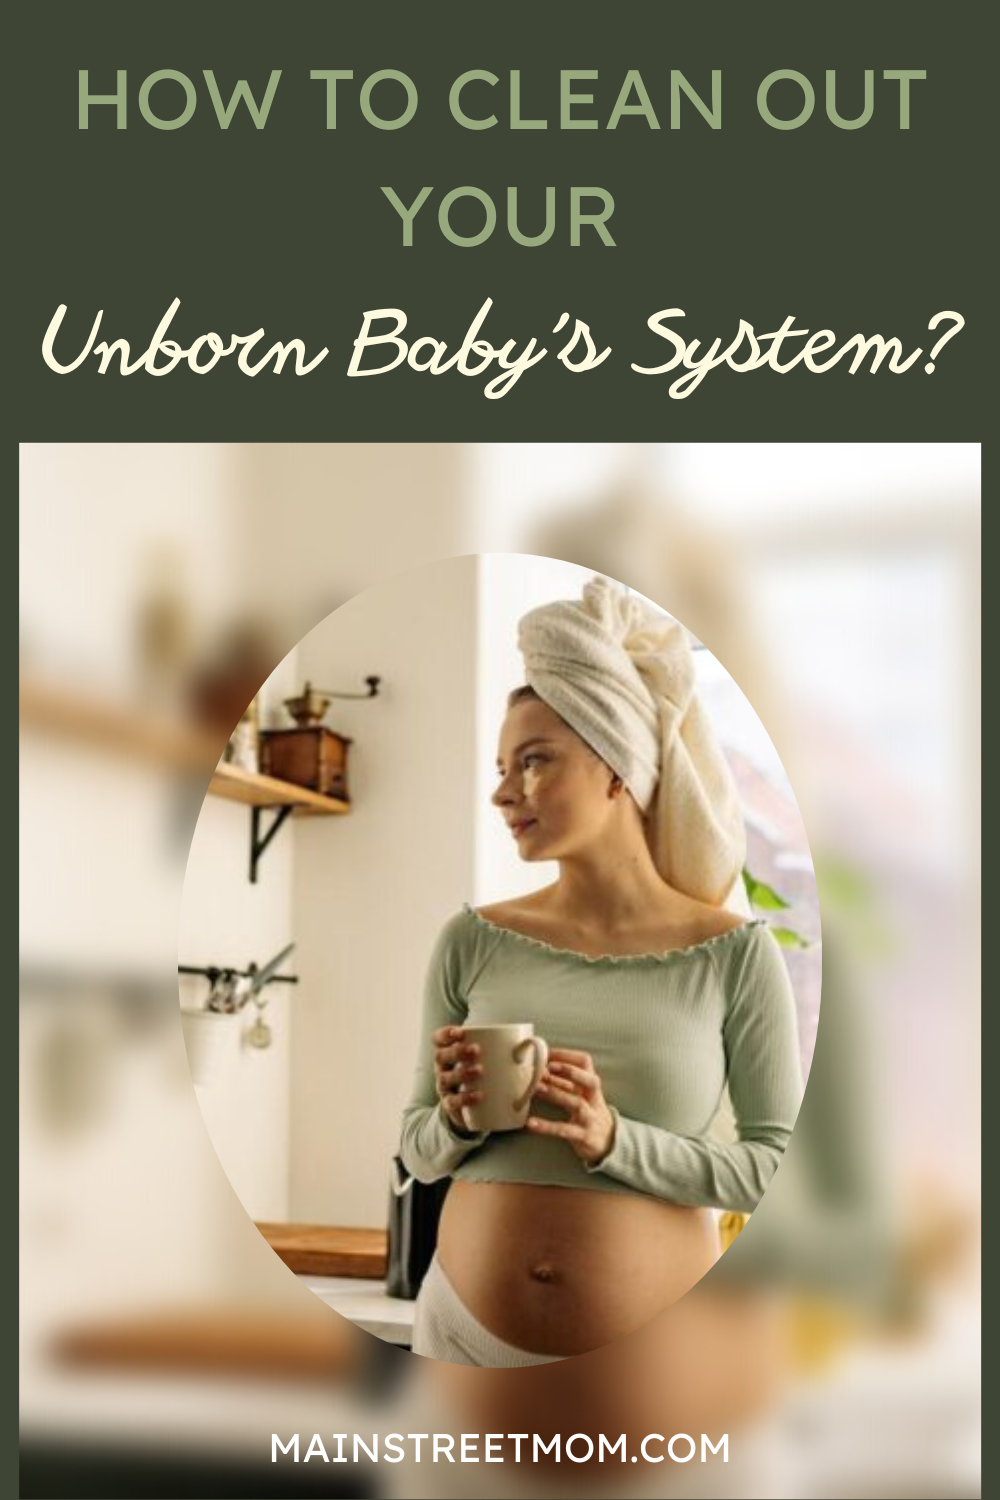 How To Clean Out Your Unborn Baby's System?